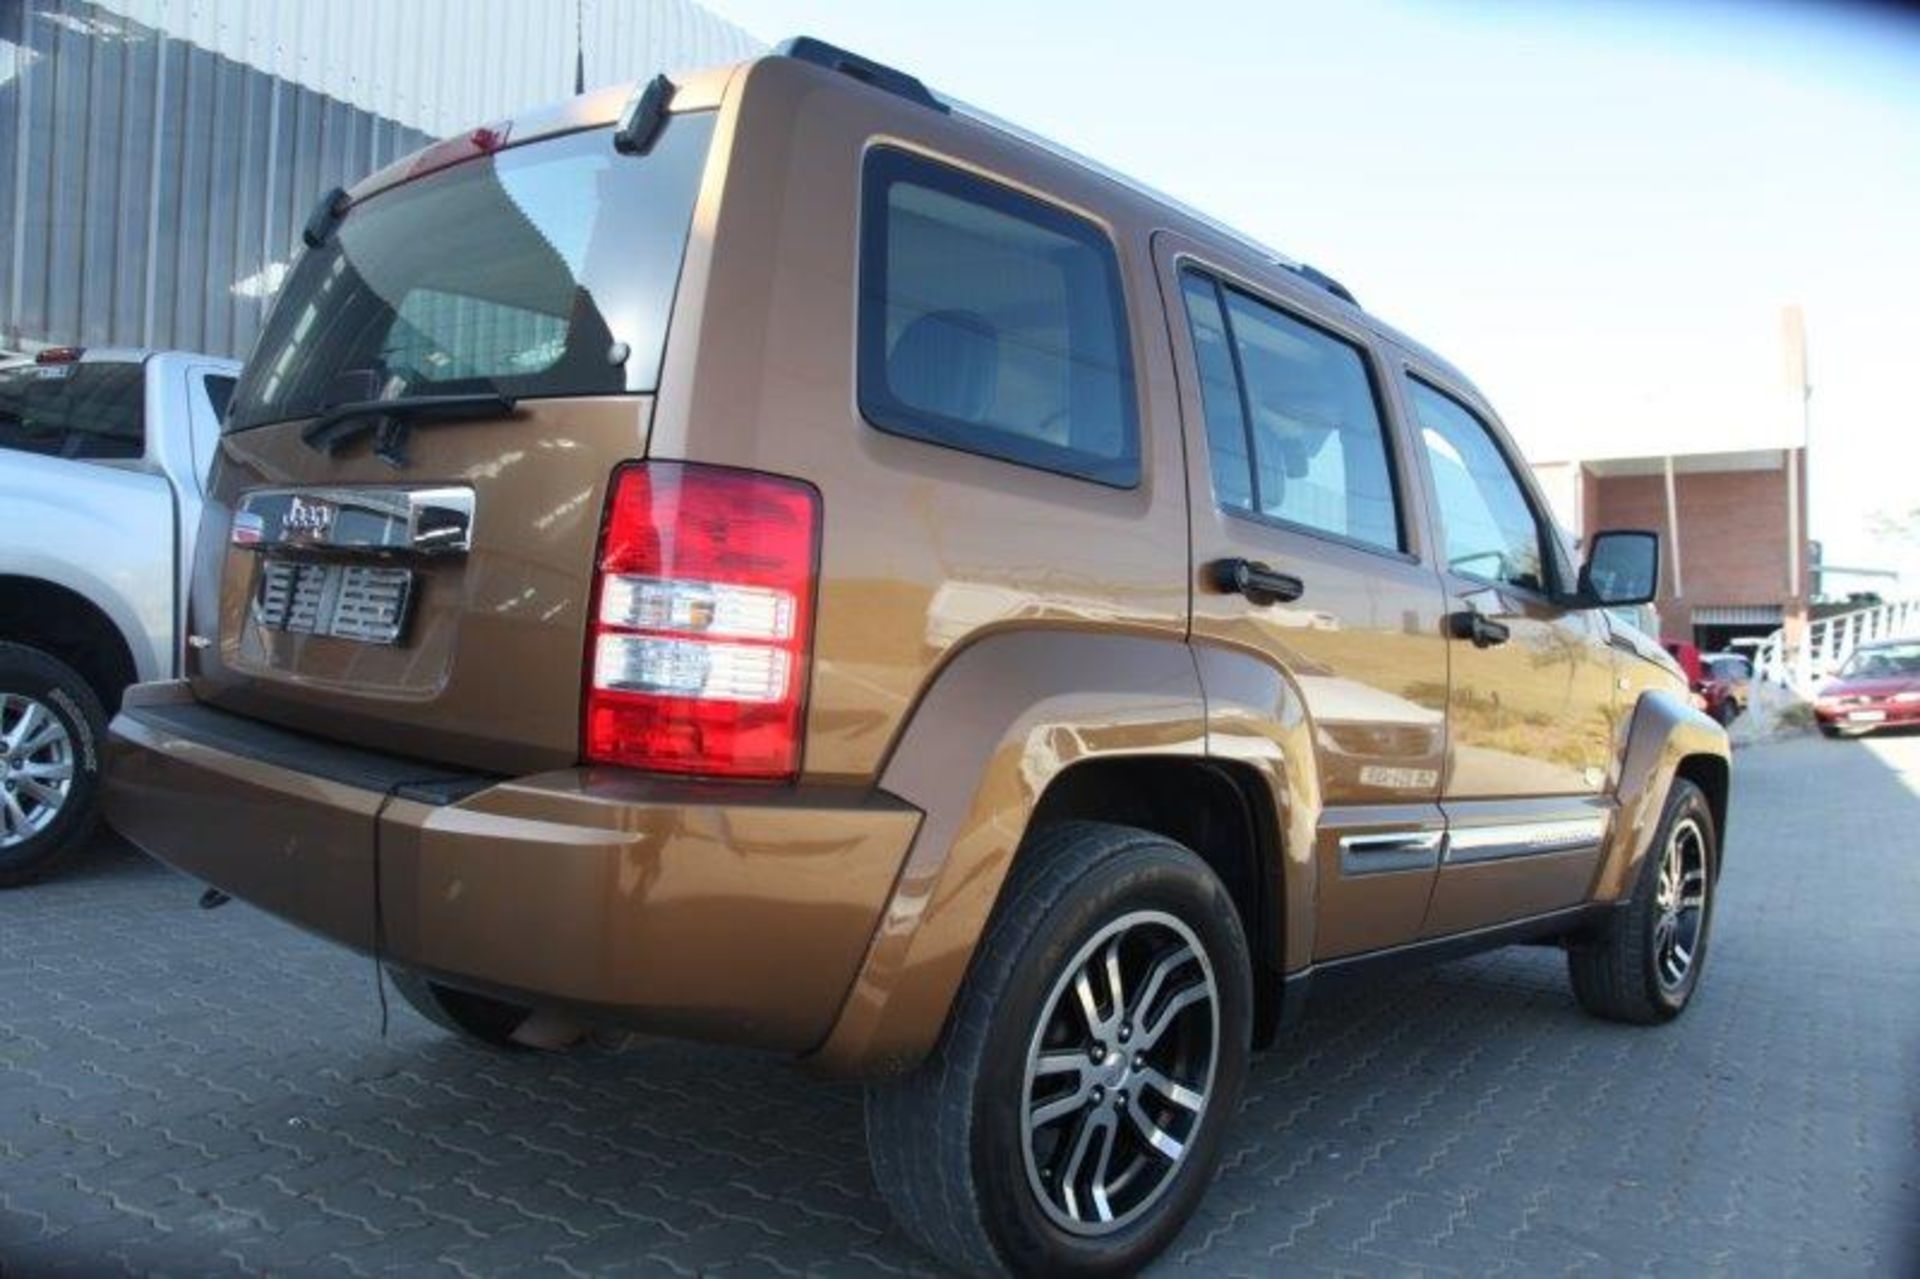 2011 Jeep Cherokee 3.7 L V6 4X4 Auto (Vin No: 1J4P45GK8BW559264 )(160460 kms) - Image 3 of 6